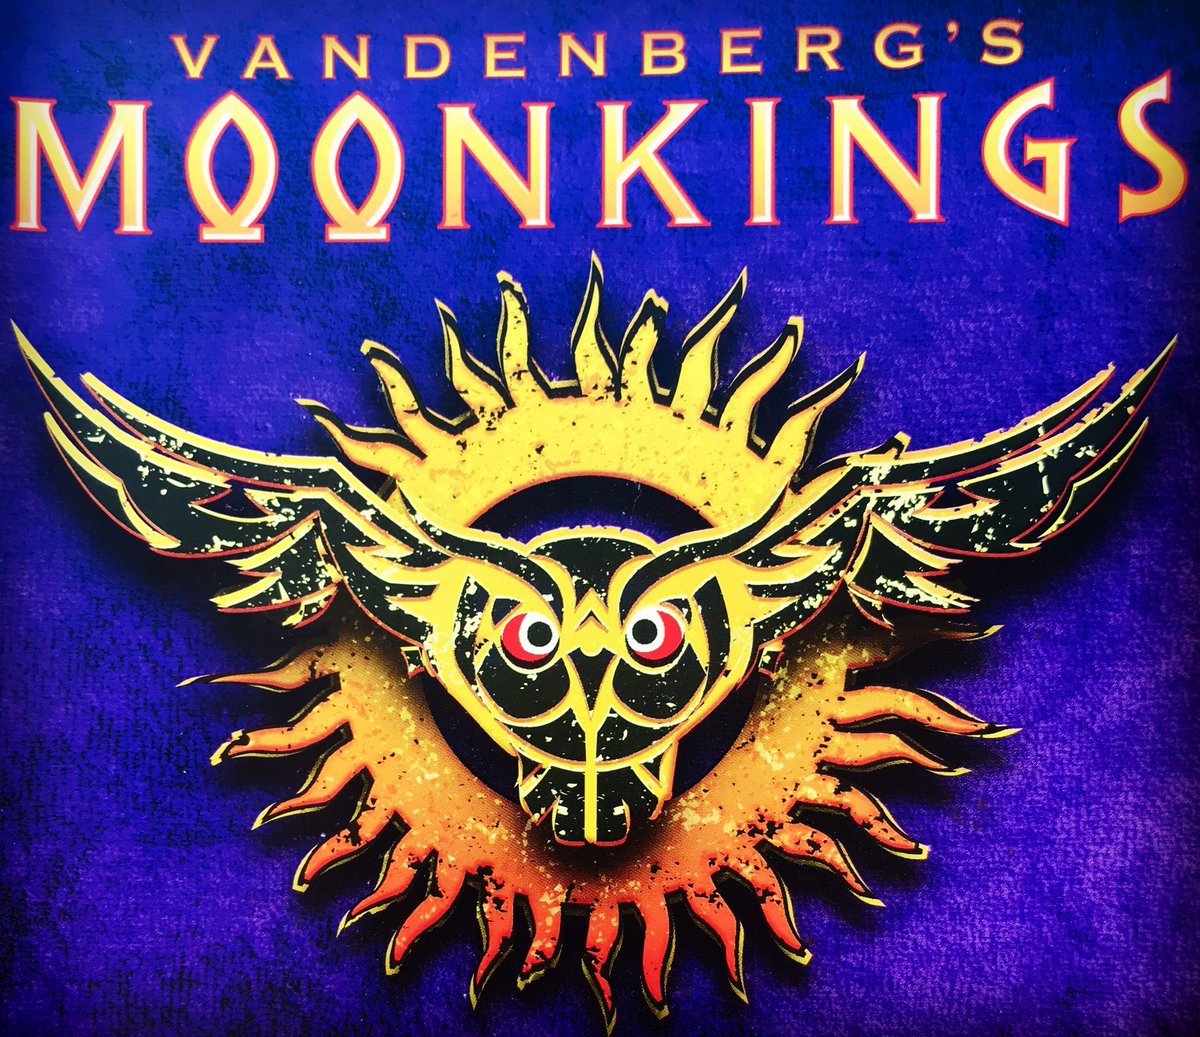 Boys and girls!Just to let you know that the MoonKings Instagram account has risen from the grave after a long wintersleep.All bamdinfo,showdates, live stuff etc.can be found there! #moonkingsband #vandenberg #adrianvandenberg #whitesnake #ruggedandunplugged